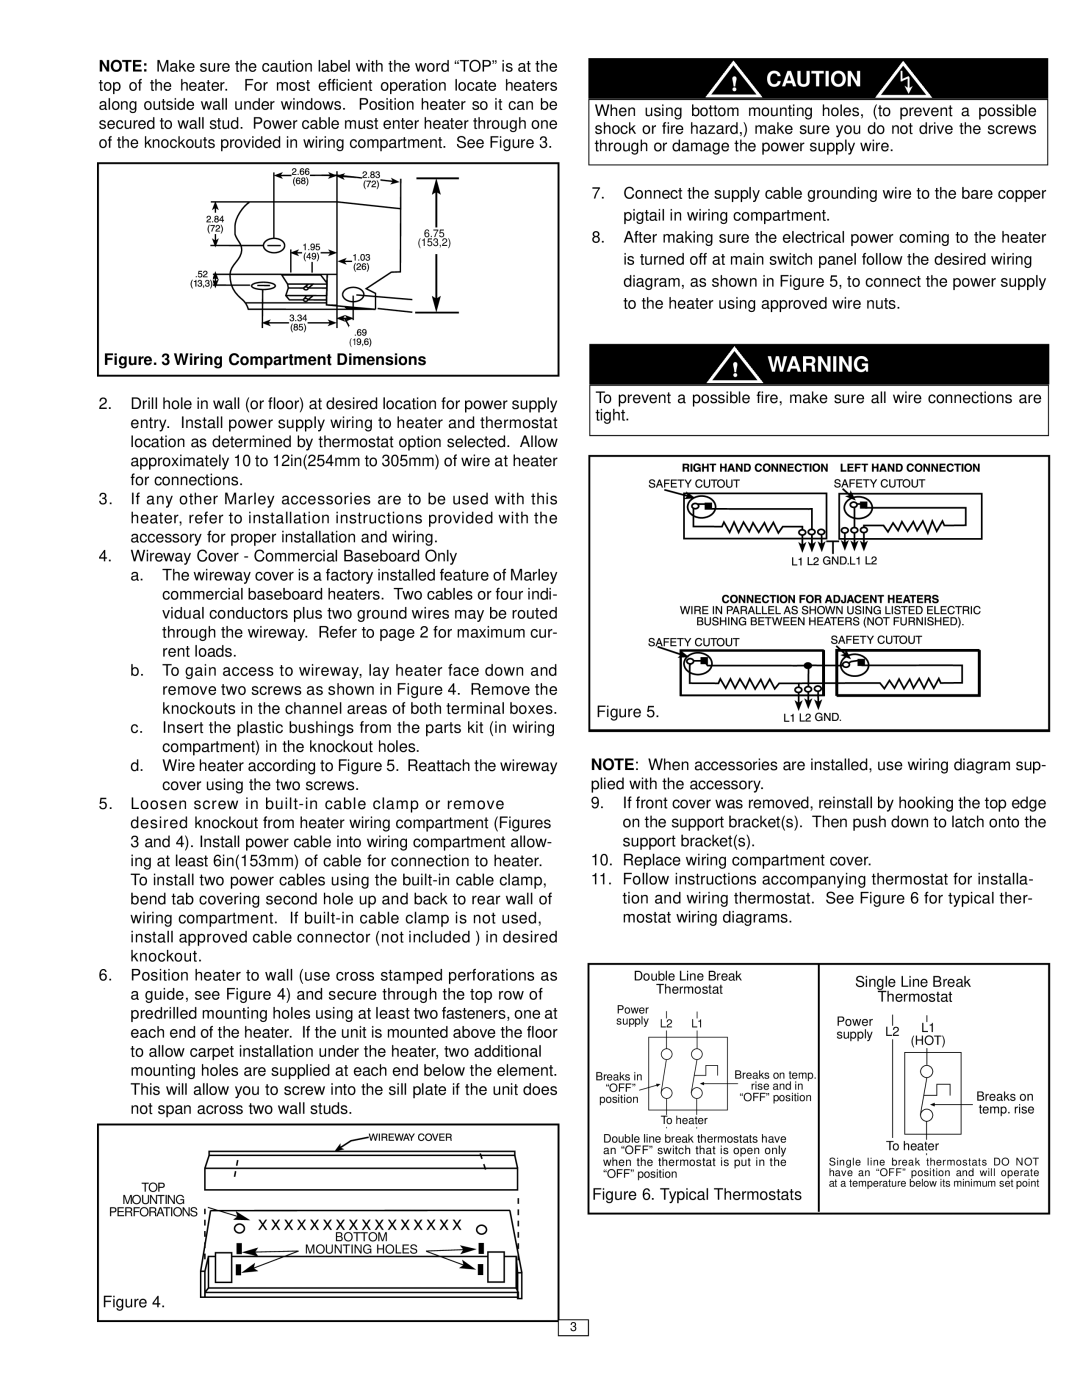 Marley Engineered Products C2500, C1800 instruction sheet Figure. 3 Wiring Compartment Dimensions 